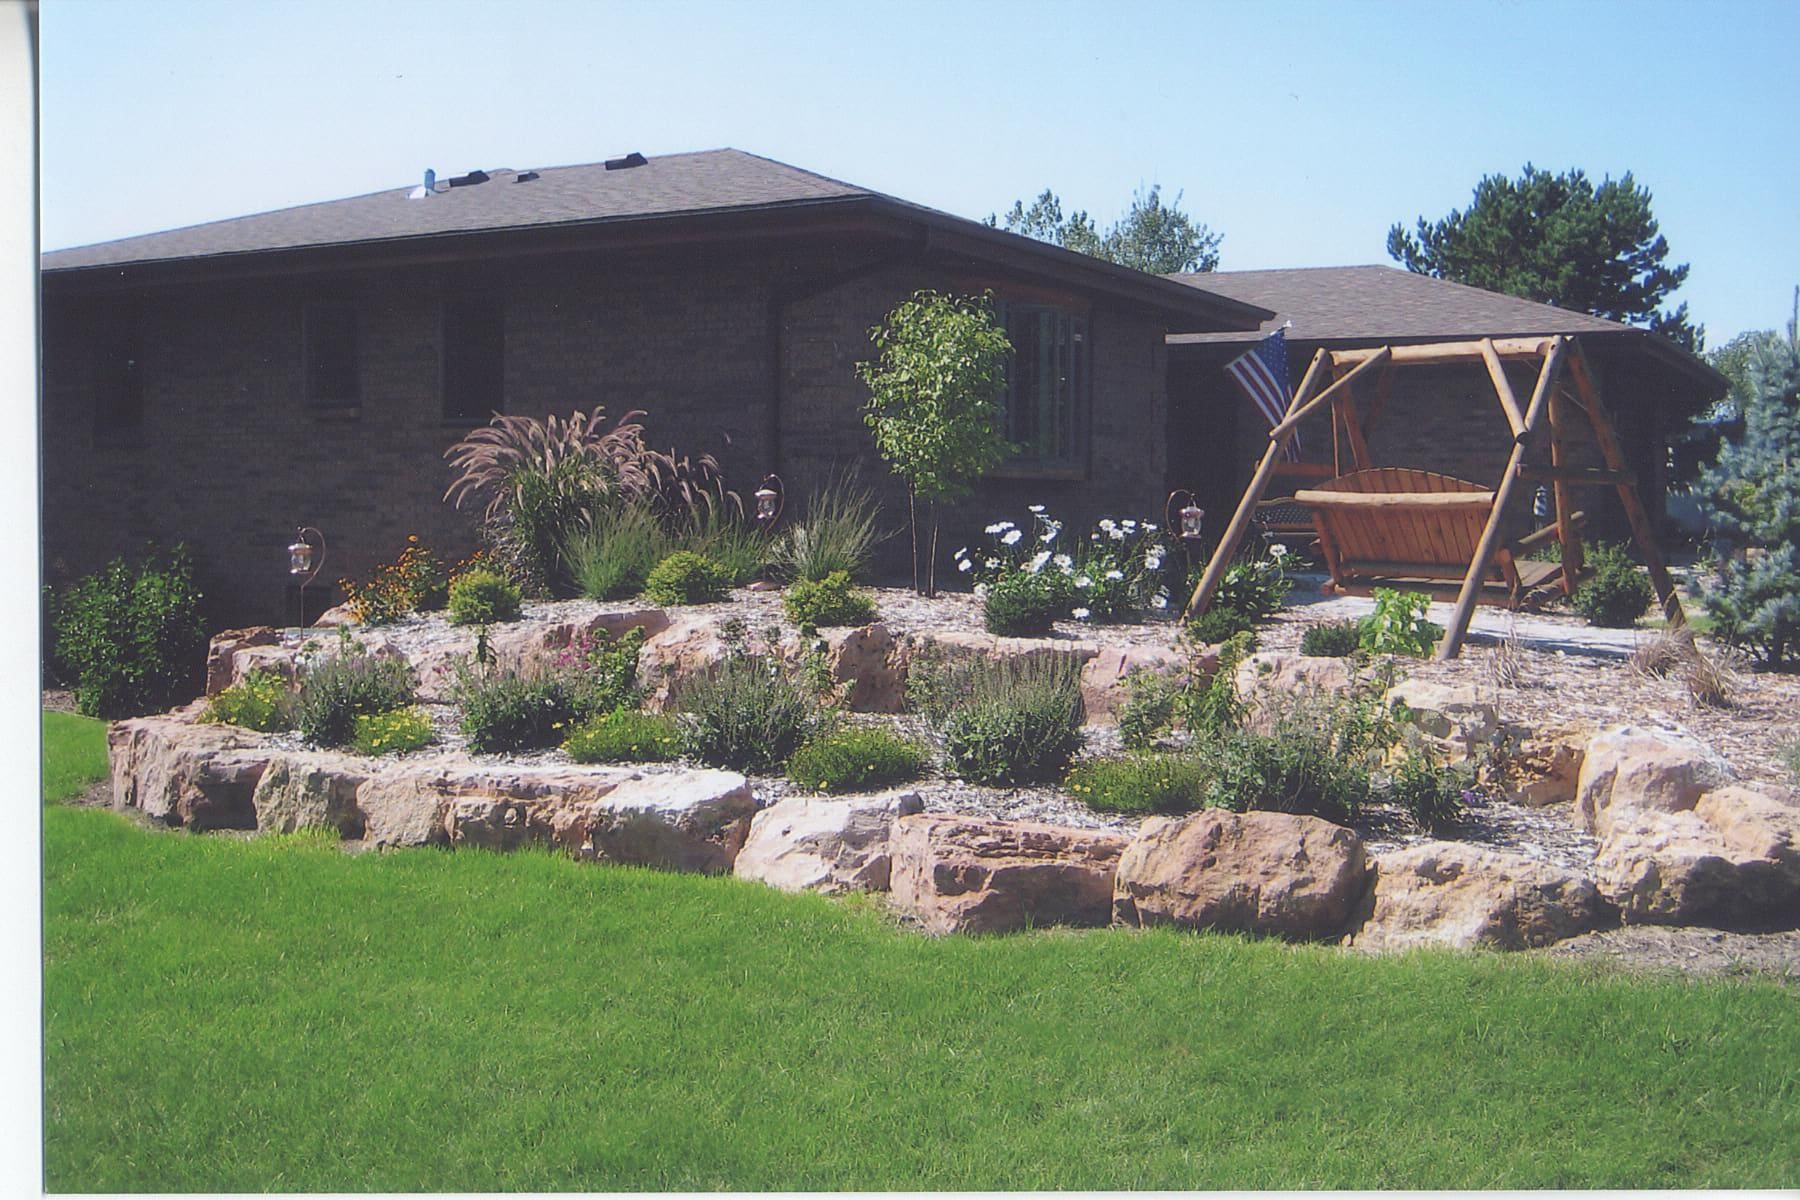 Pahl's Plant Installation in Prior Lake